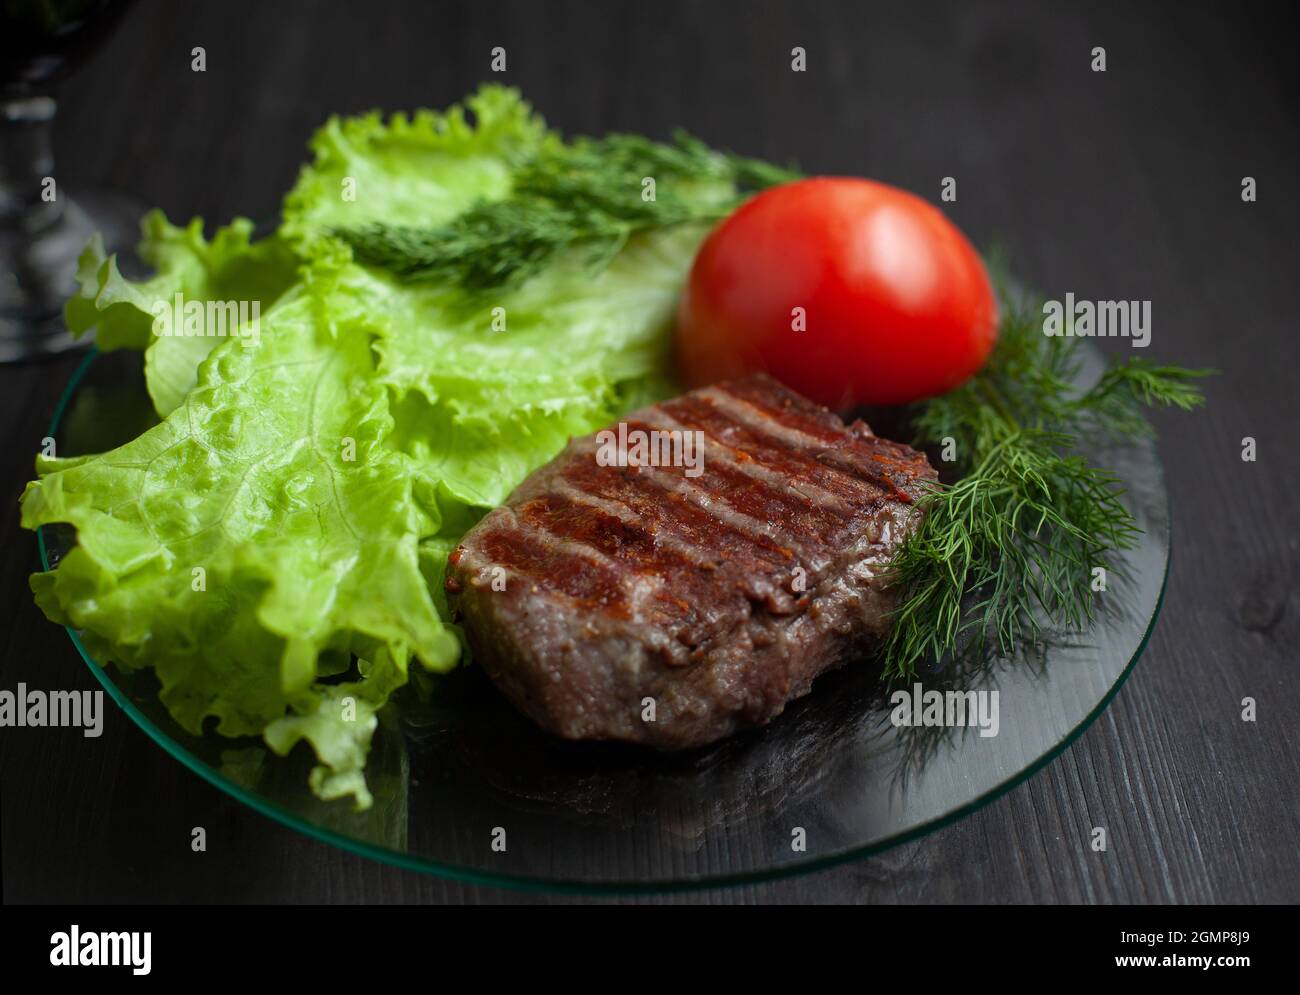 Grilled steak with vegetable salad and herbs. Concept for a tasty and healthy meal. Dark bakground Stock Photo